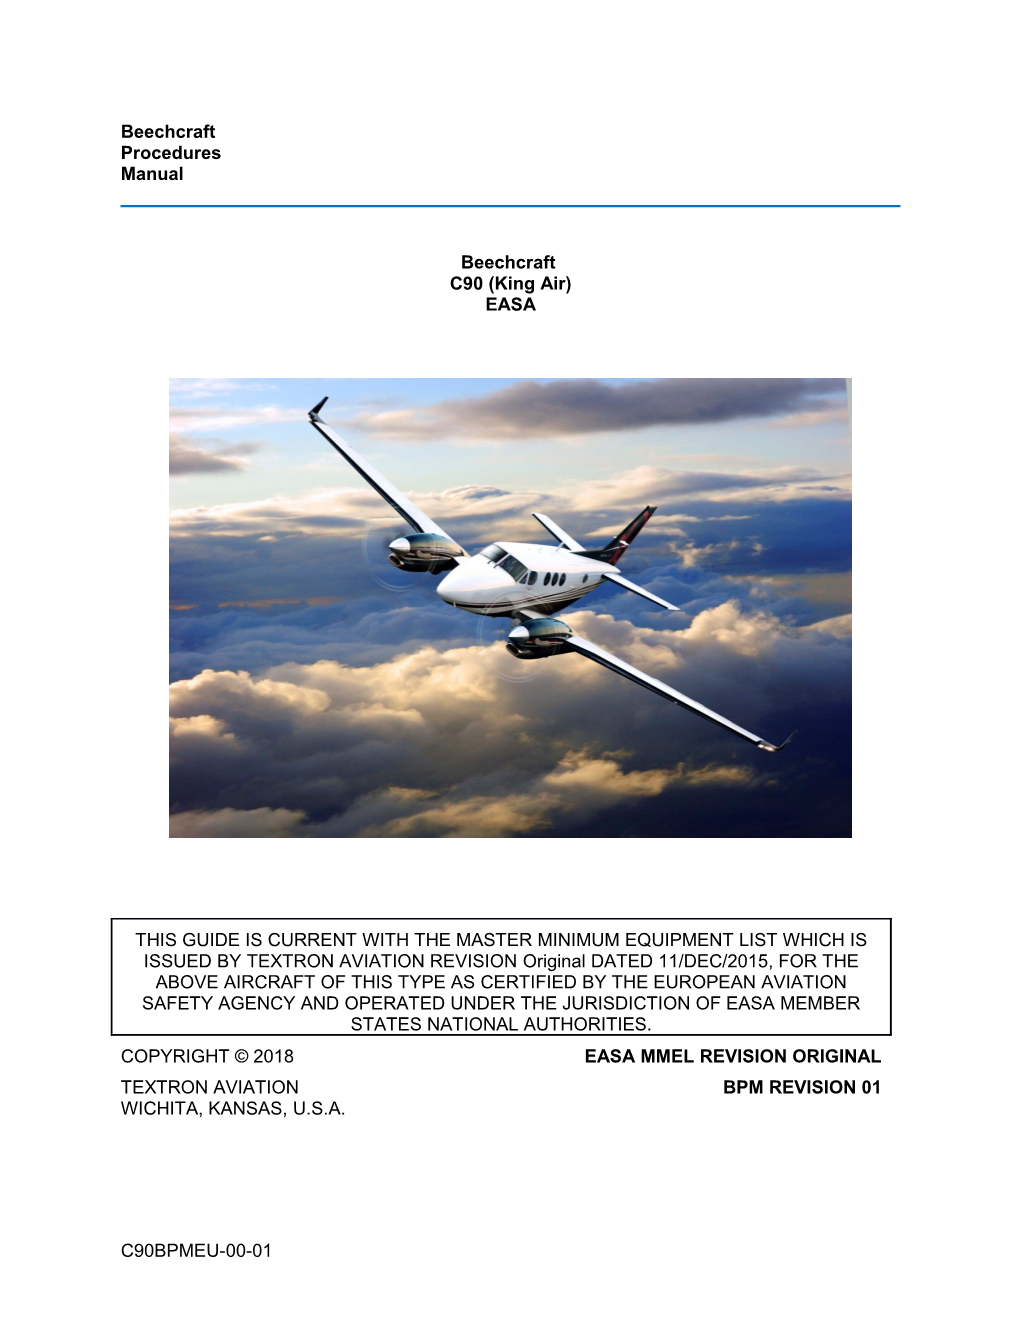 The Master Minimum Equipment List (MMEL) Is Issued by Textron Aviation for Aircraft Certified